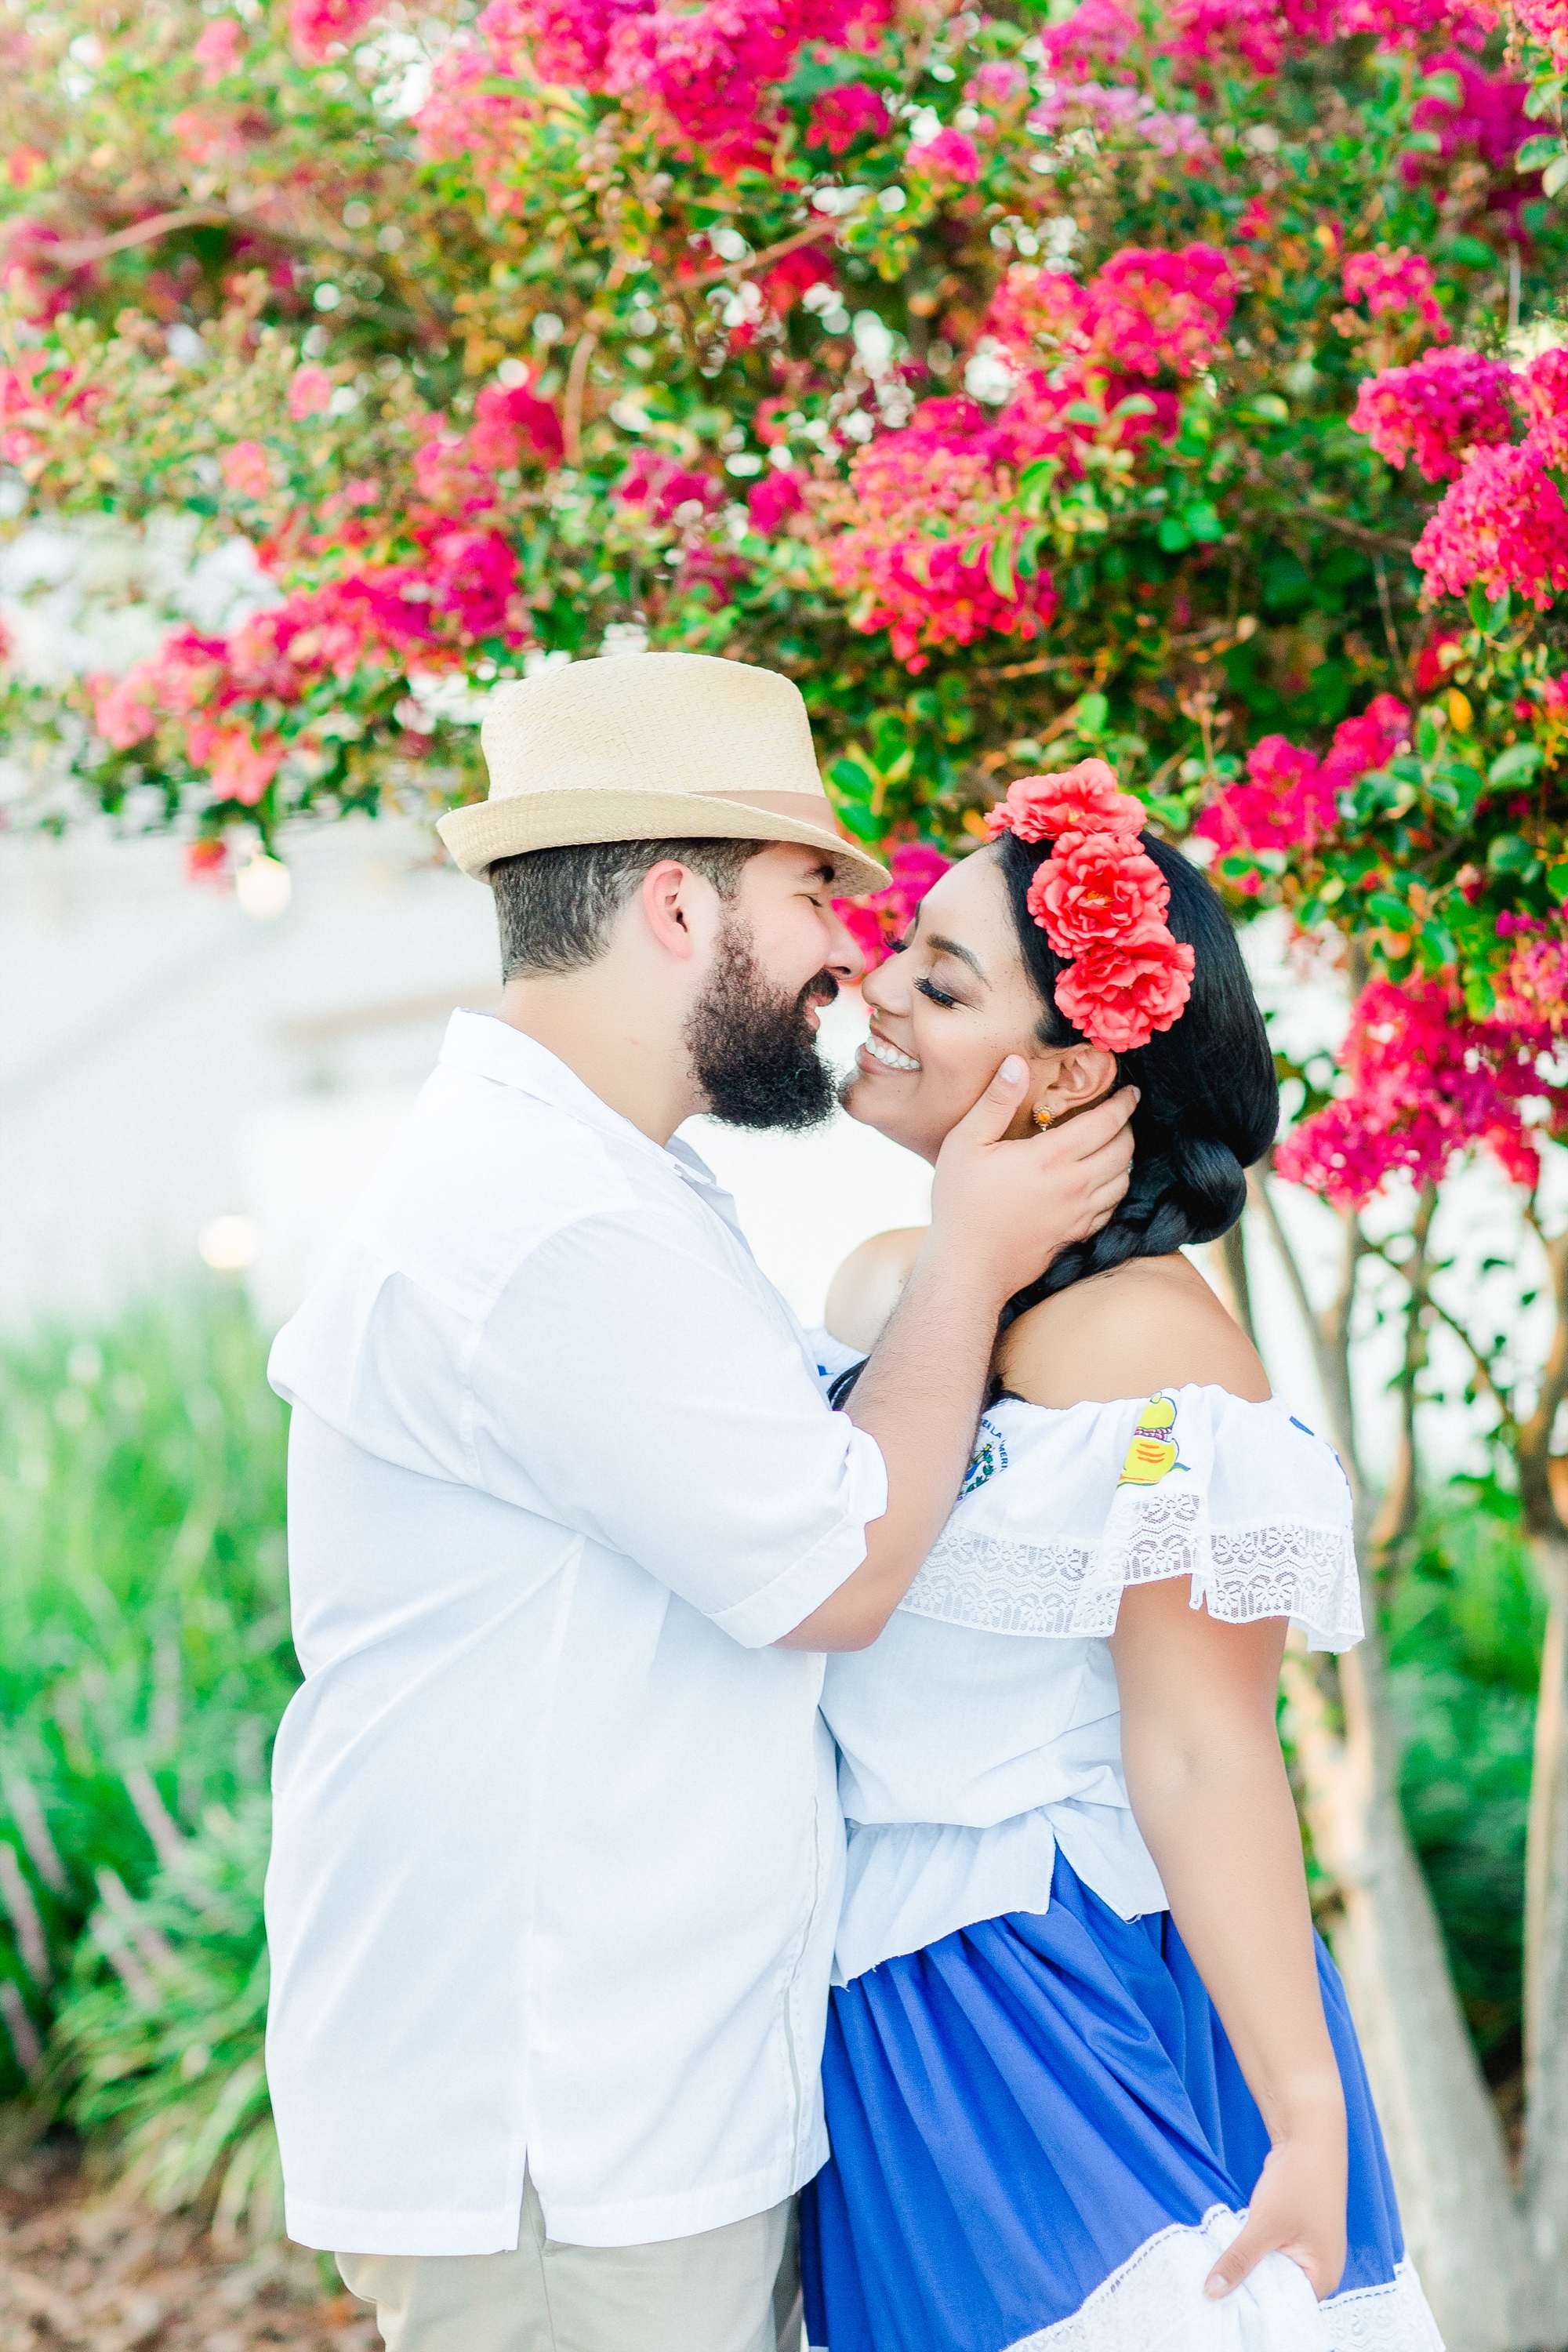 Tampa Engagement | © Ailyn La Torre Photography 2019